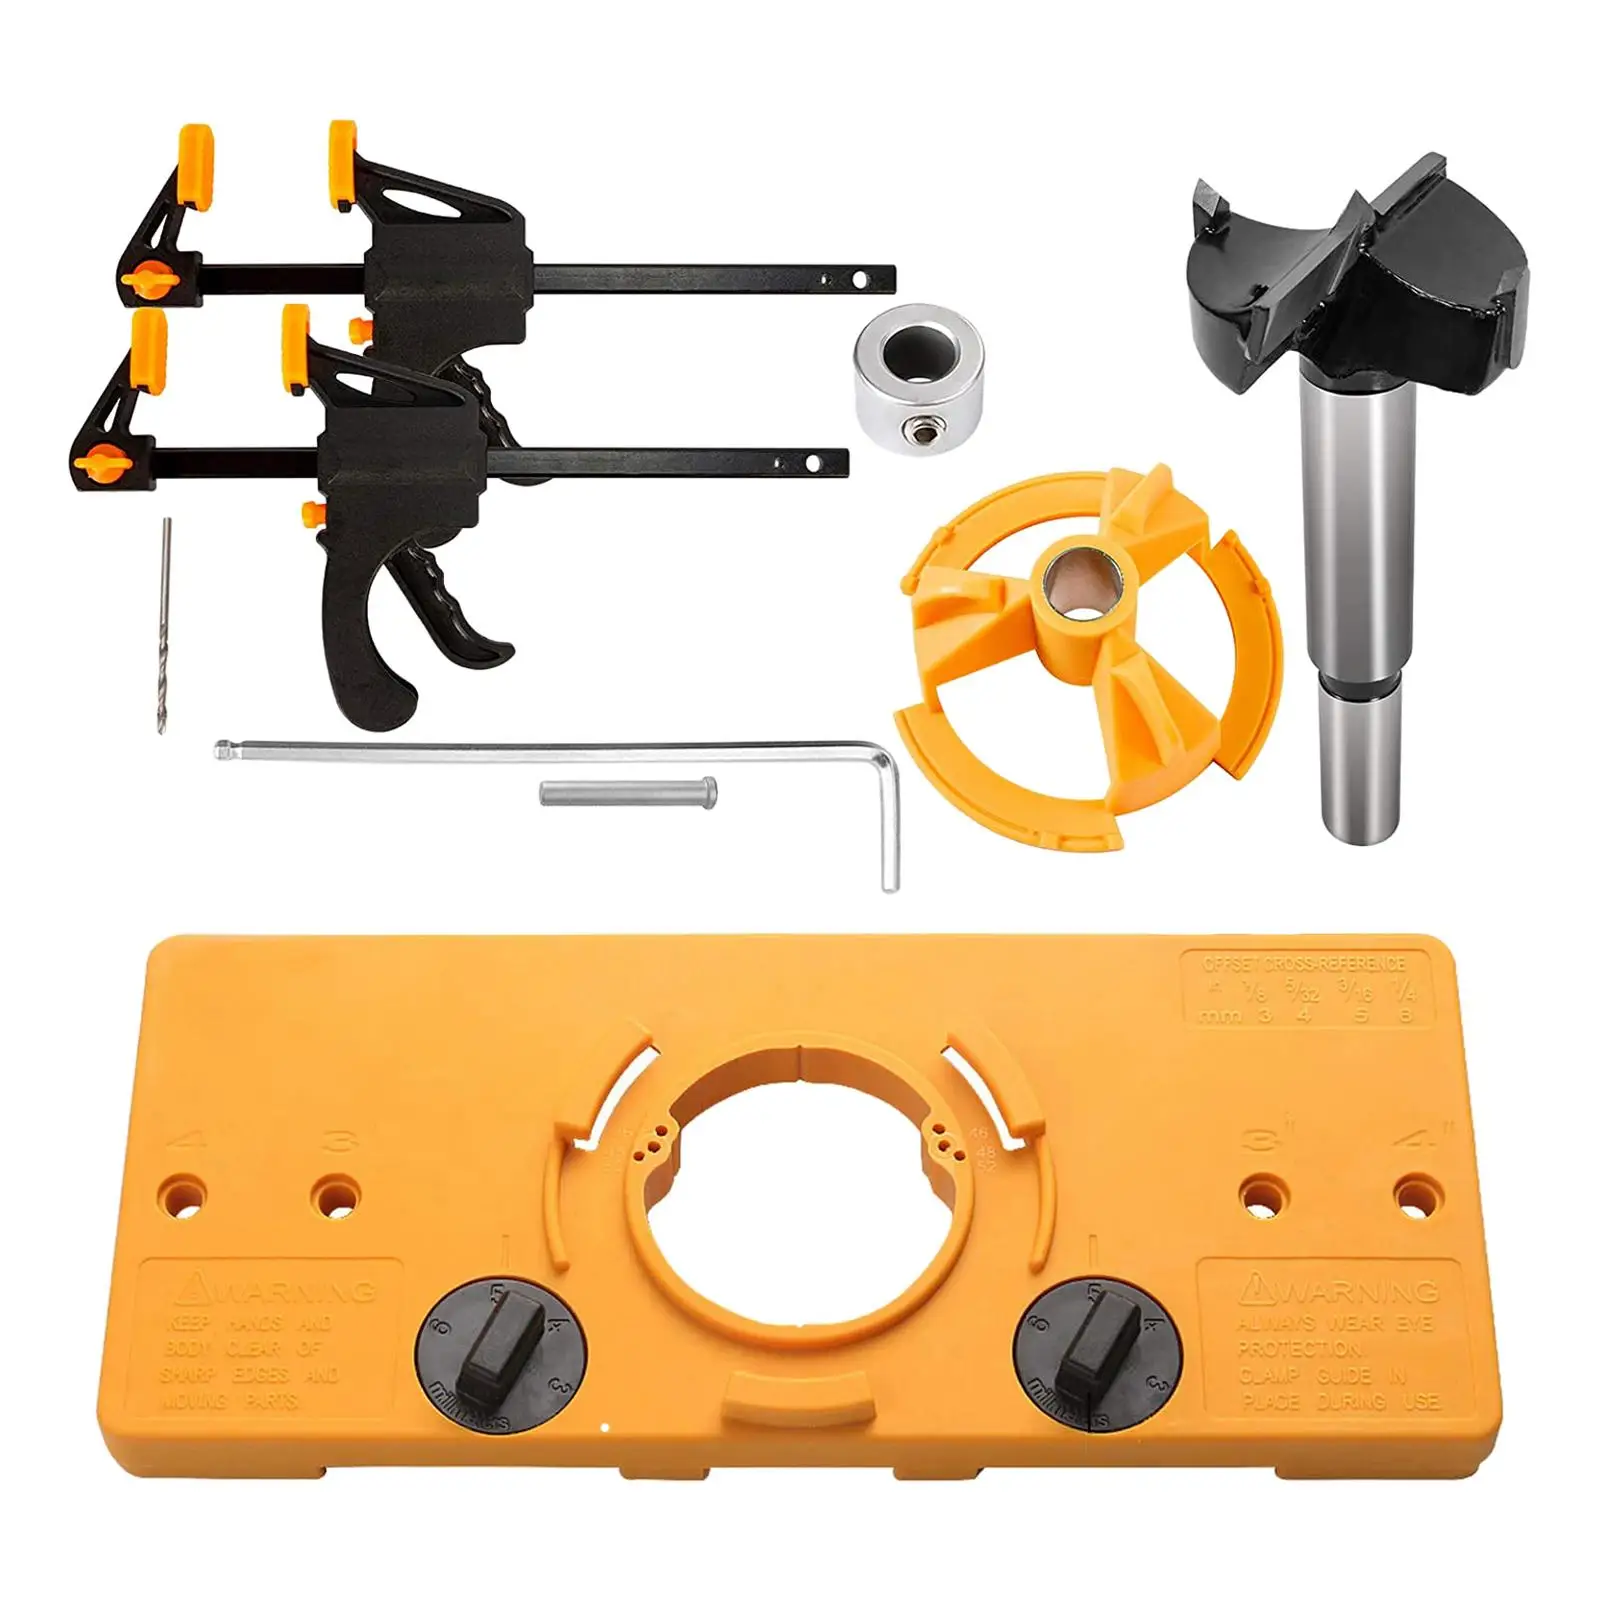 35mm Hinge Hole Drilling   Locator Open Hole Positioner for Cabinet Door